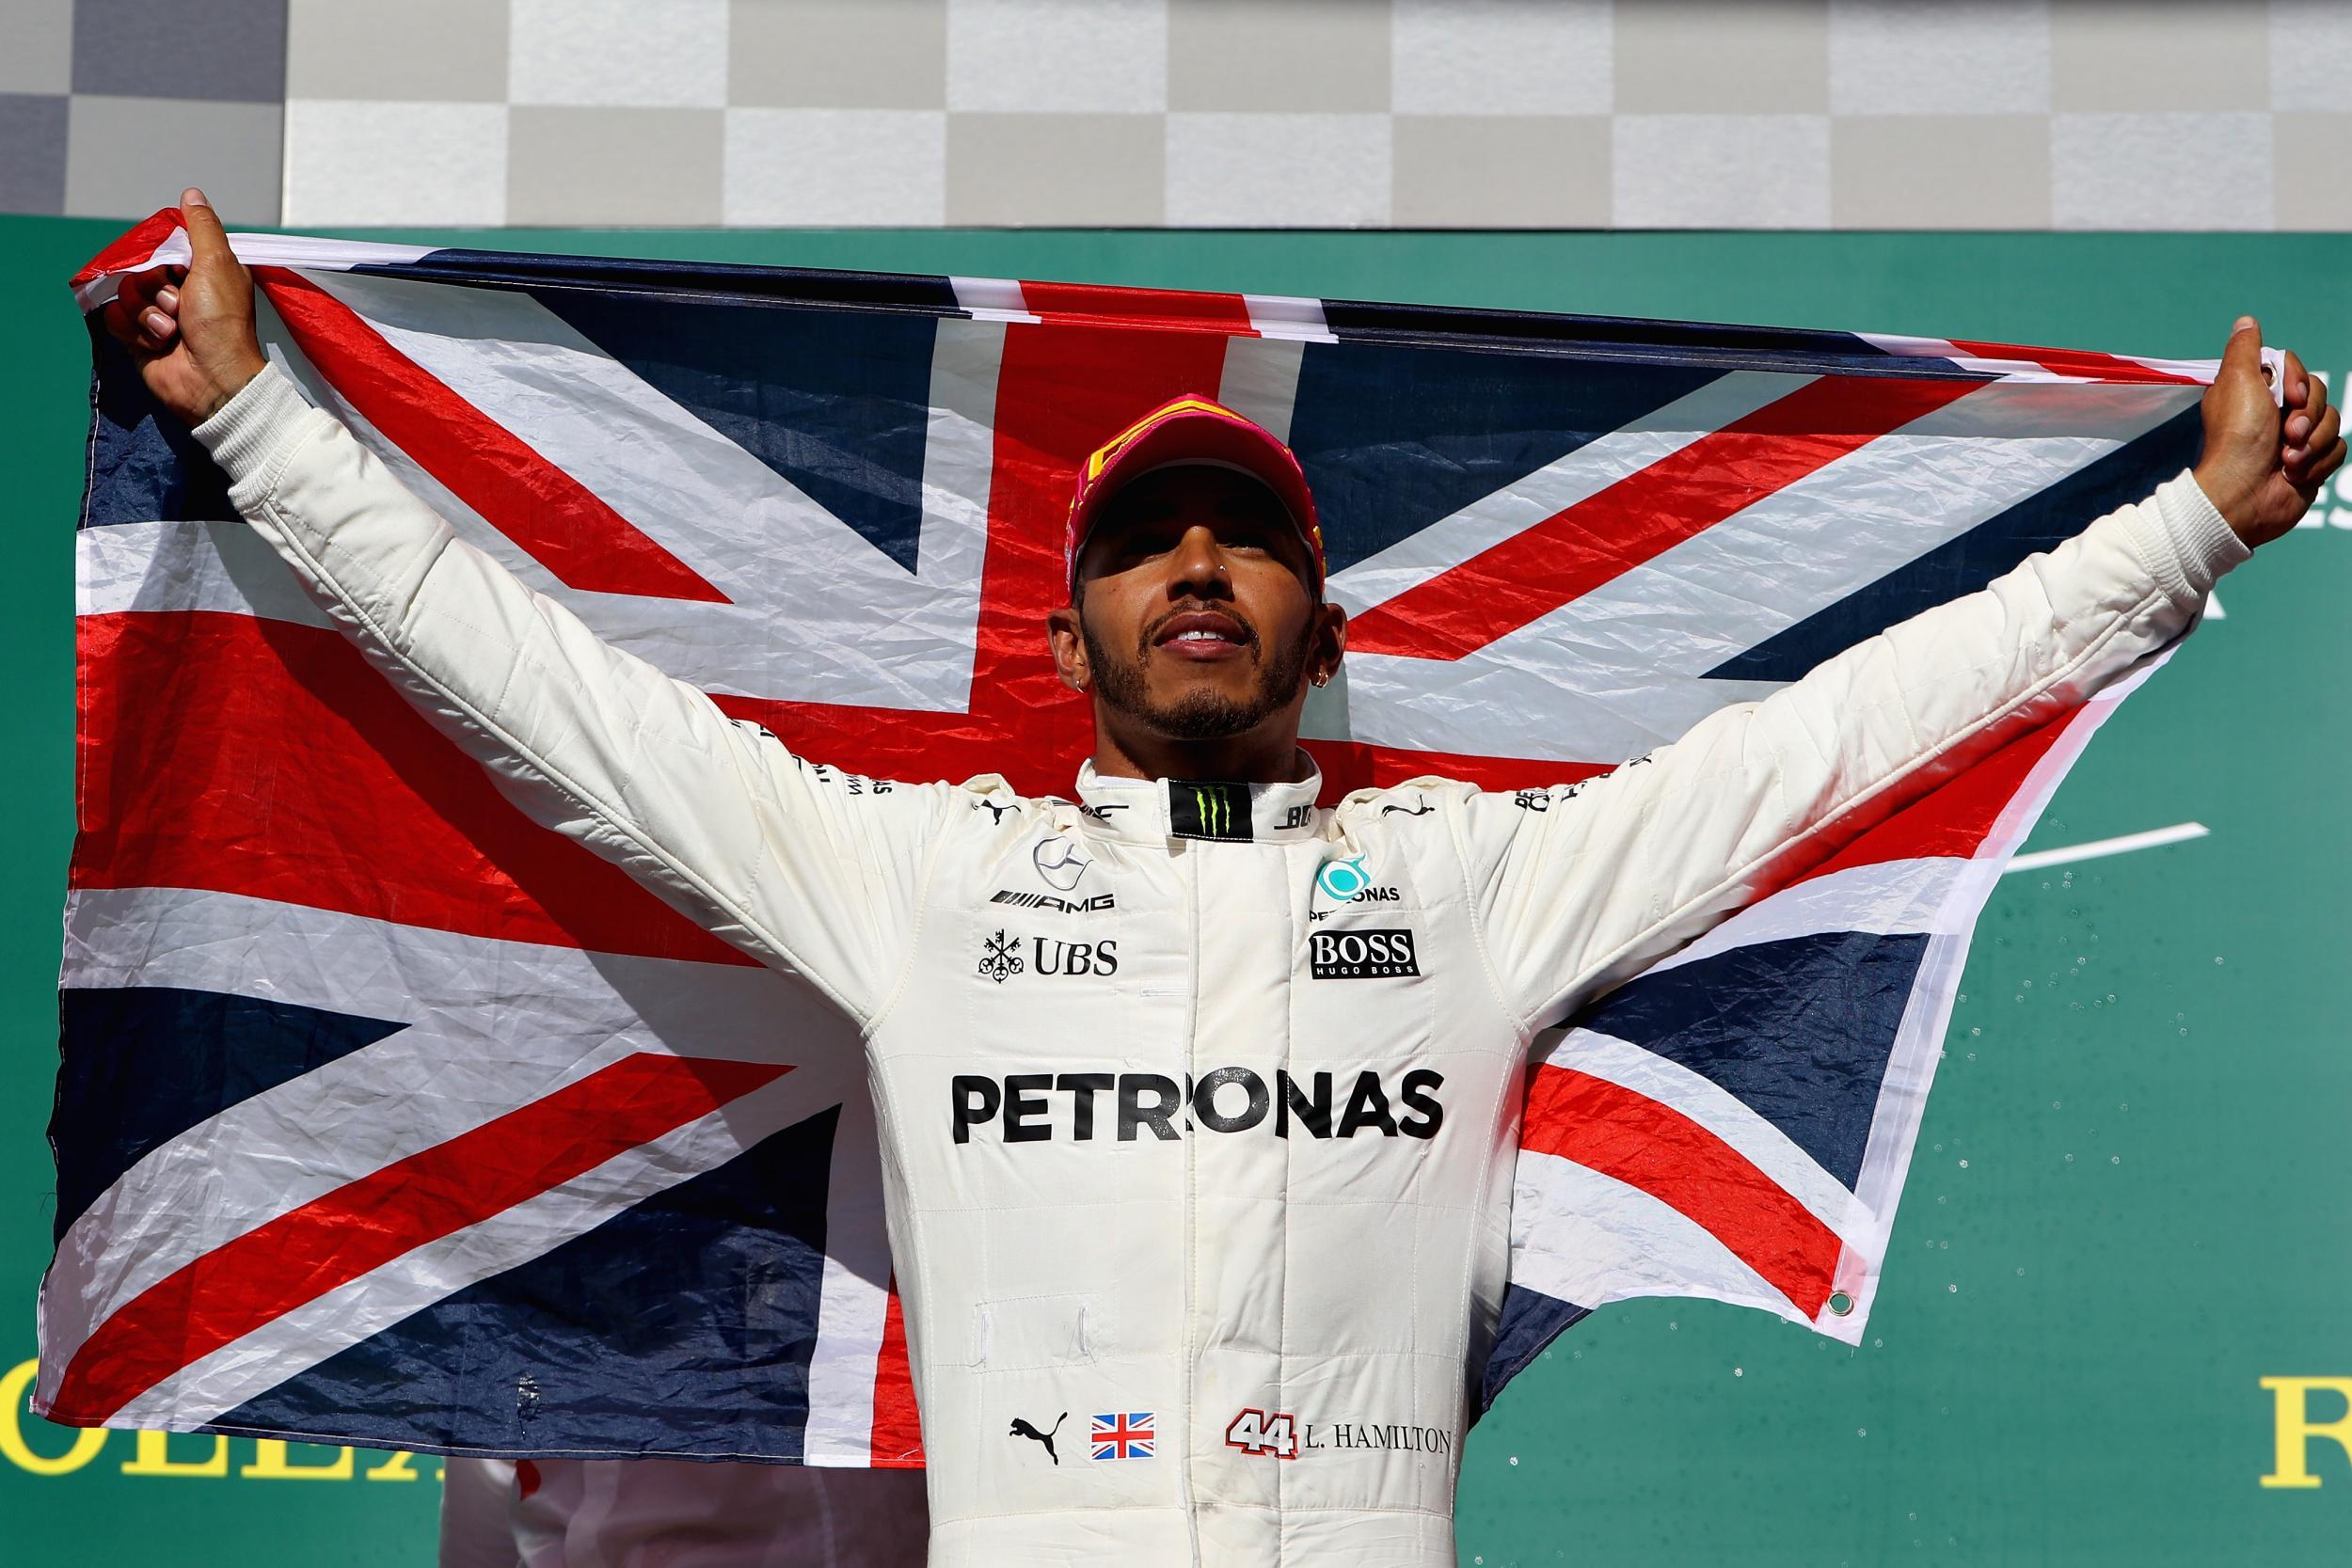 Lewis Hamilton is set to become a four-time world champion